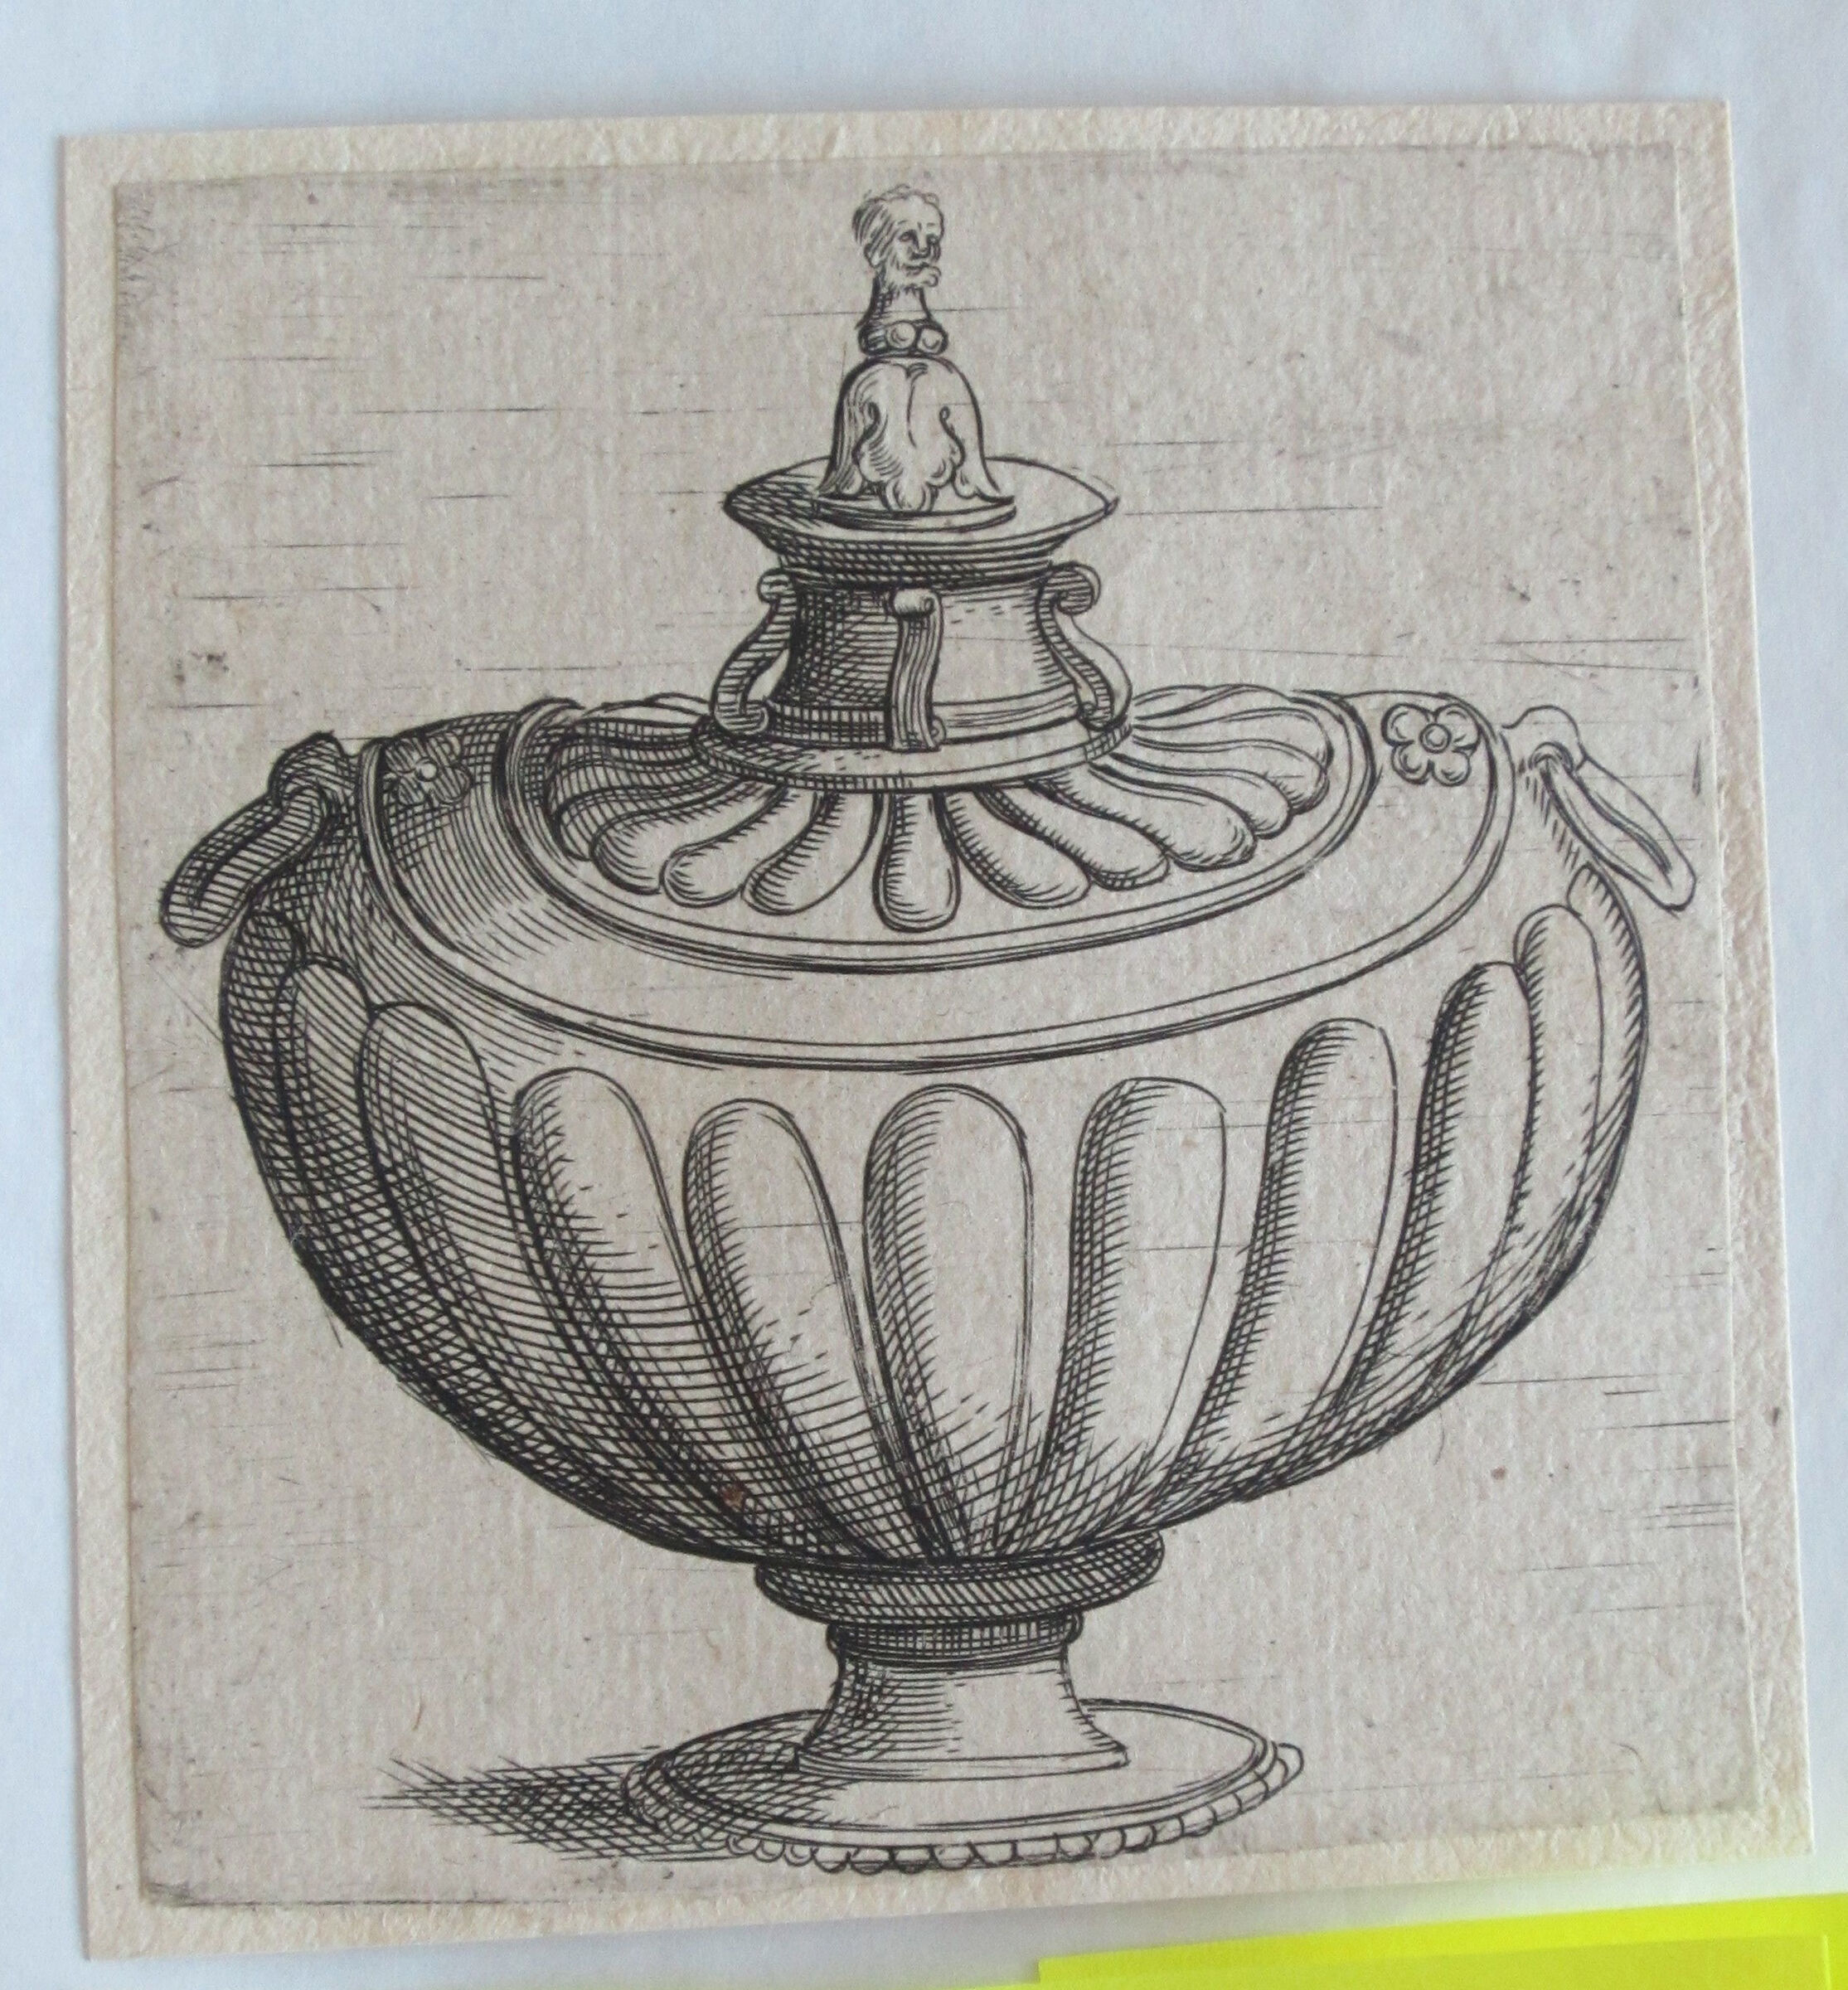 Covered Vase With Gadrooning, Ring Handles, And A Bearded Head On Its Knob